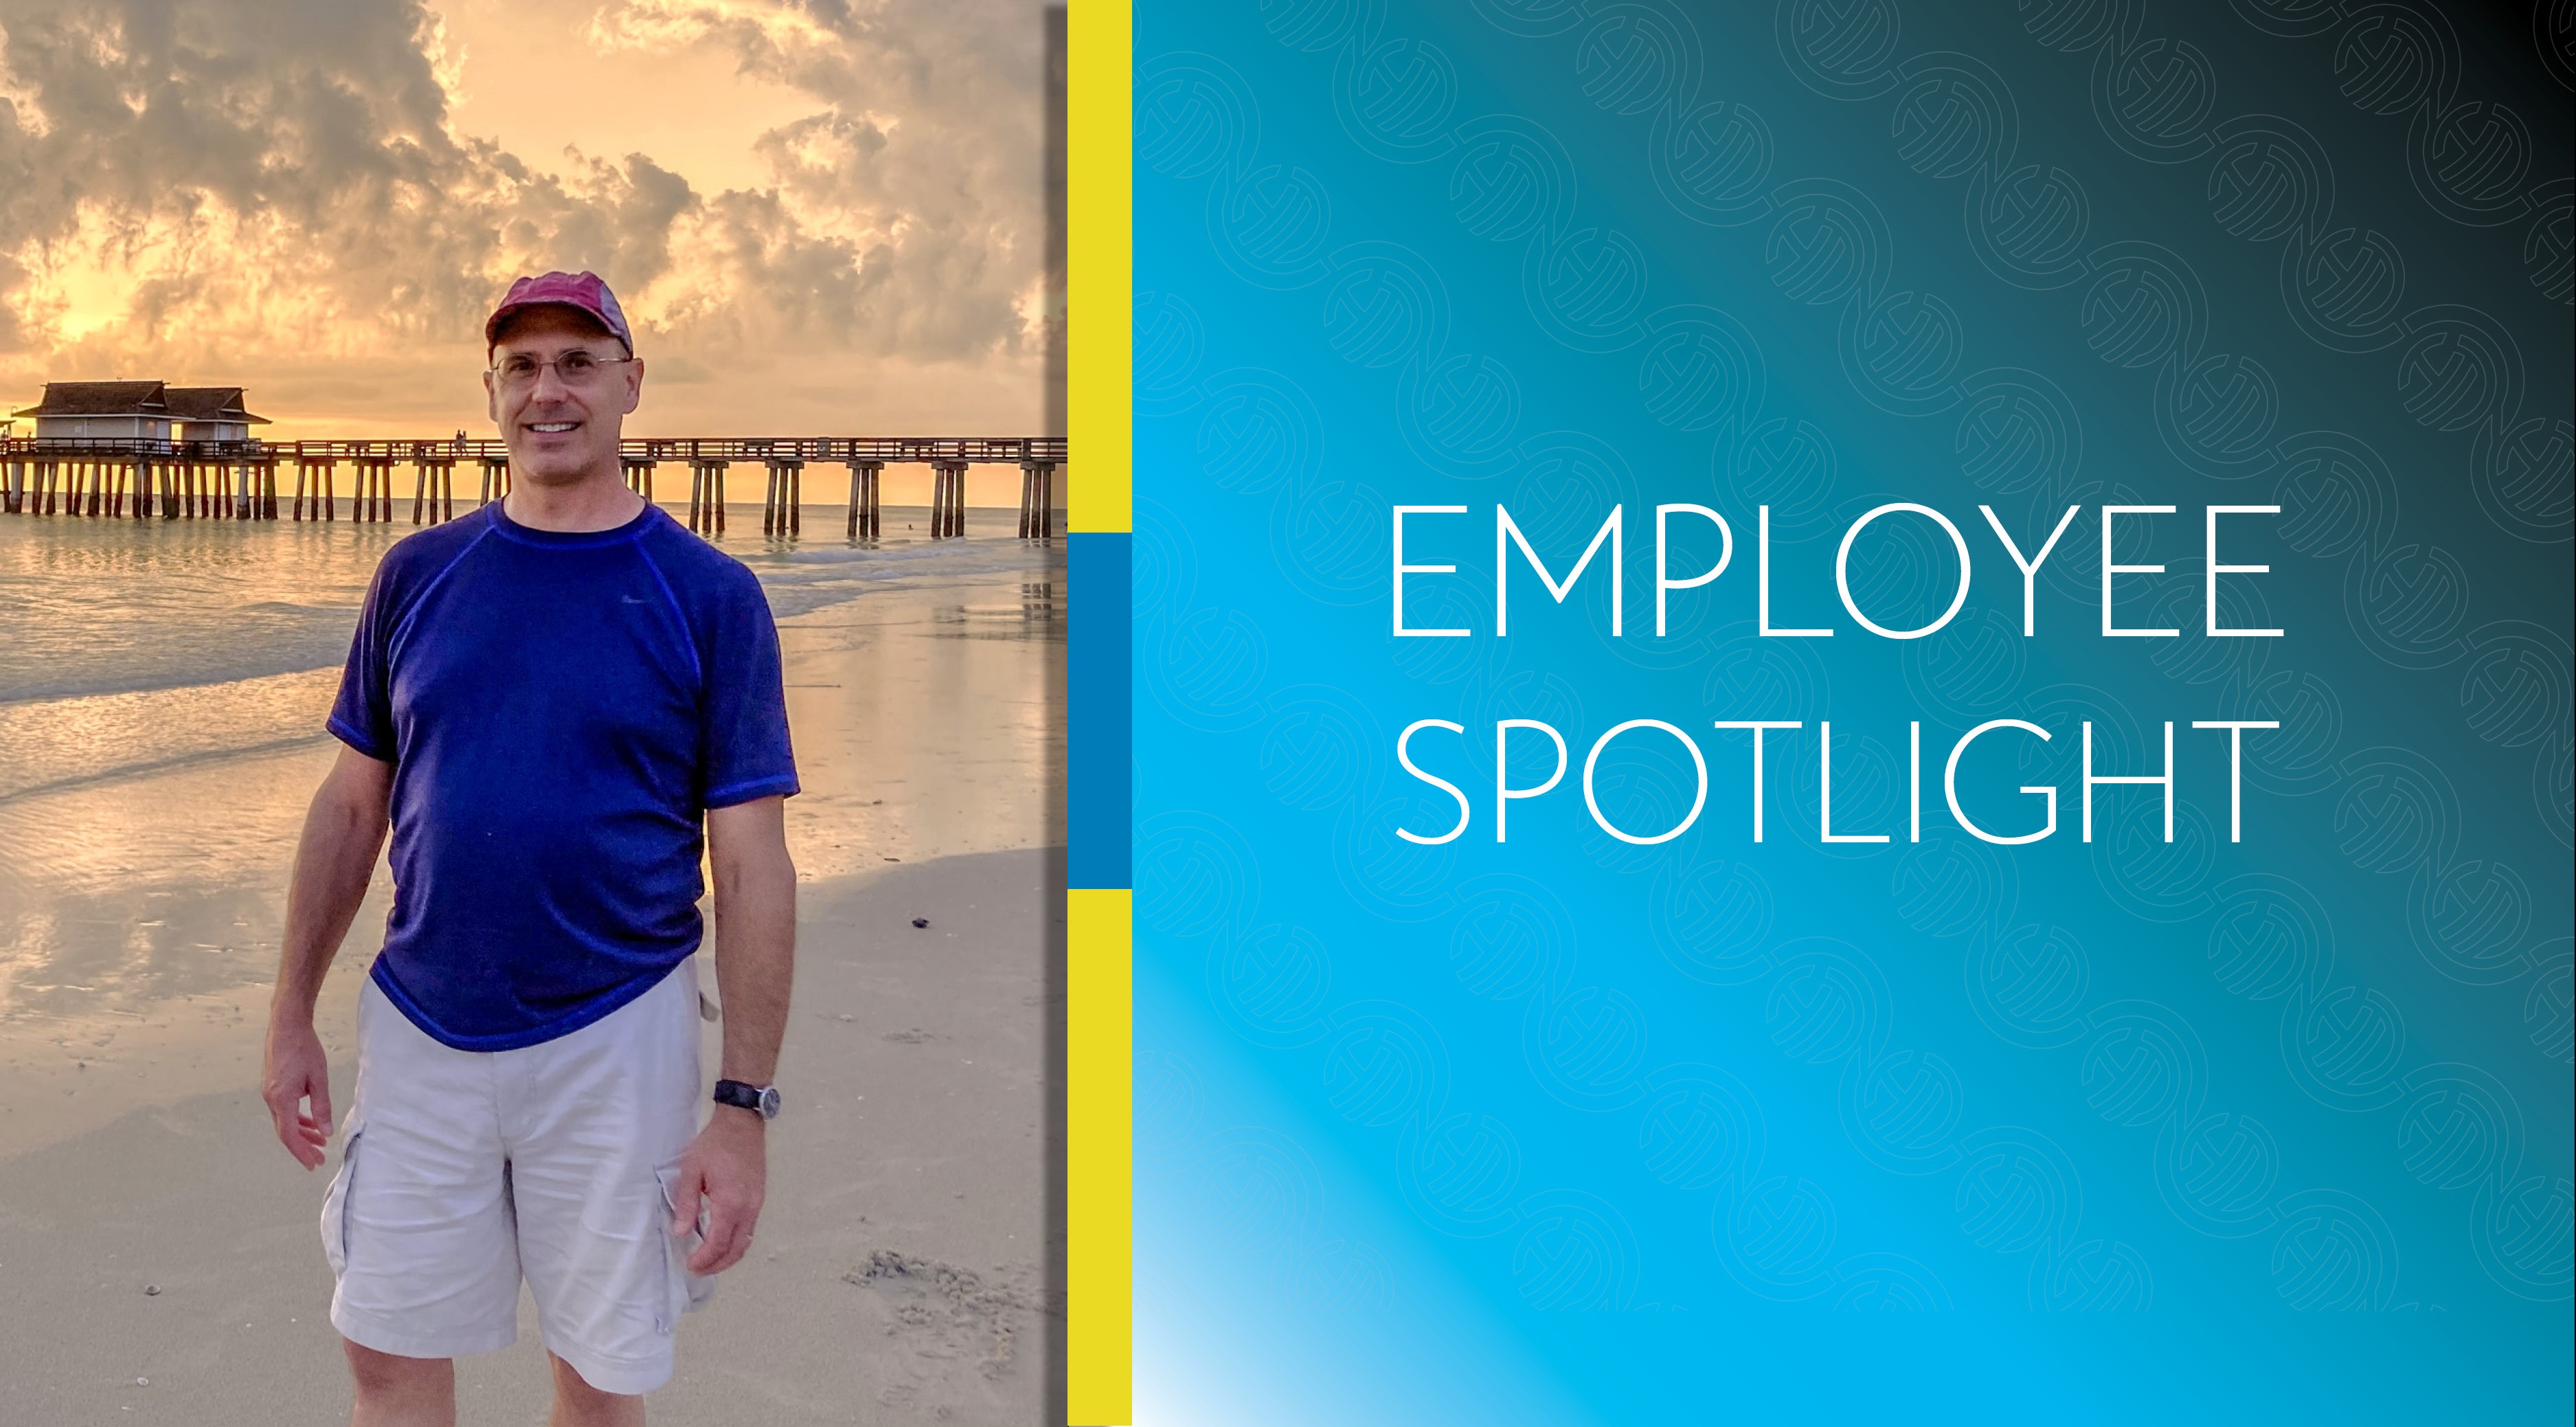 Employee Spotlight image for Jonathan Crowdes, shown in a photo next to the article title. He stands in a blue shirt on a beach at sunset